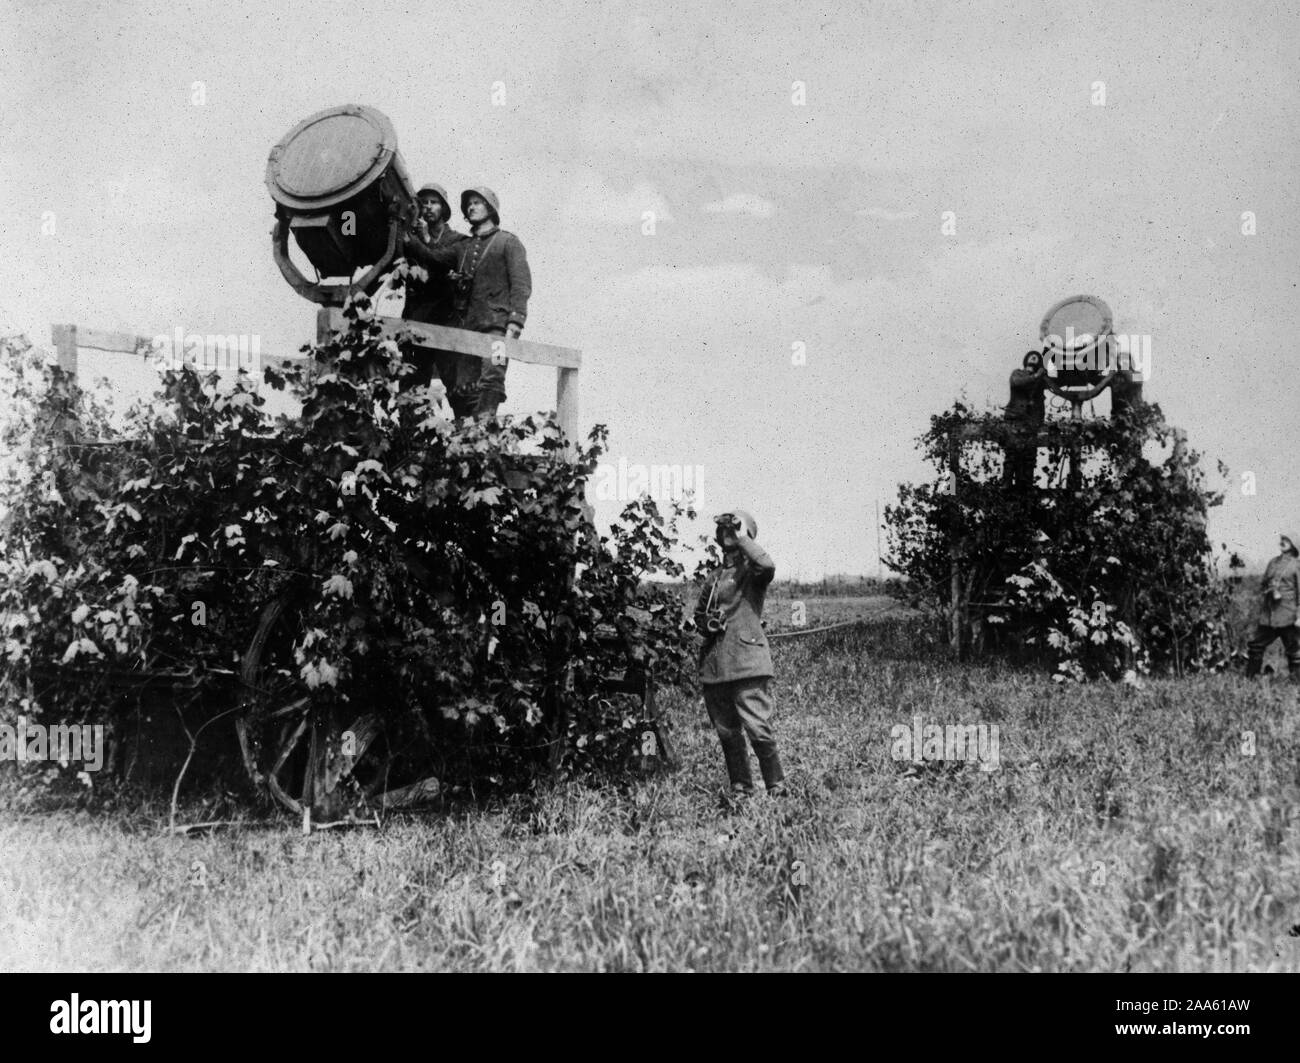 How Germans conceal searchlights. The searchlight and mount is covered with leaves and shrubbery so that it appears like a bush. When in use the camouflage is removed from the searchlight ca. 1918 Stock Photo